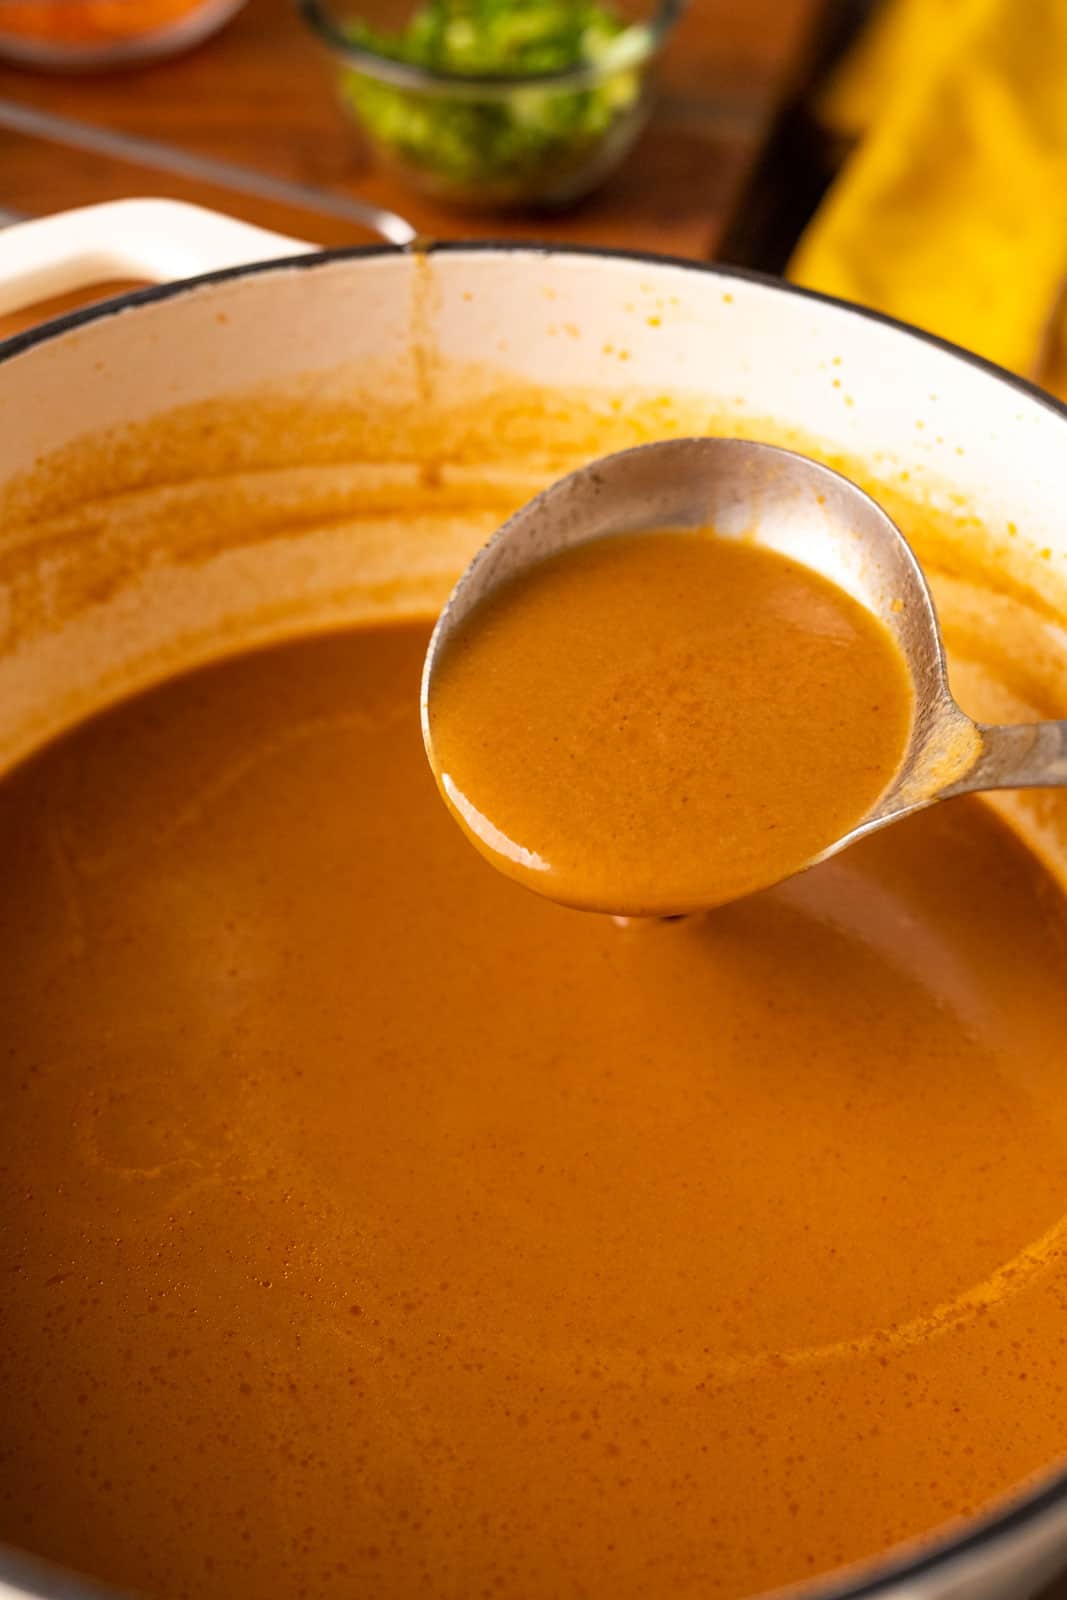 Picture of a ladle pouring the broth to show the creamy, smooth texture of the orange coloured broth